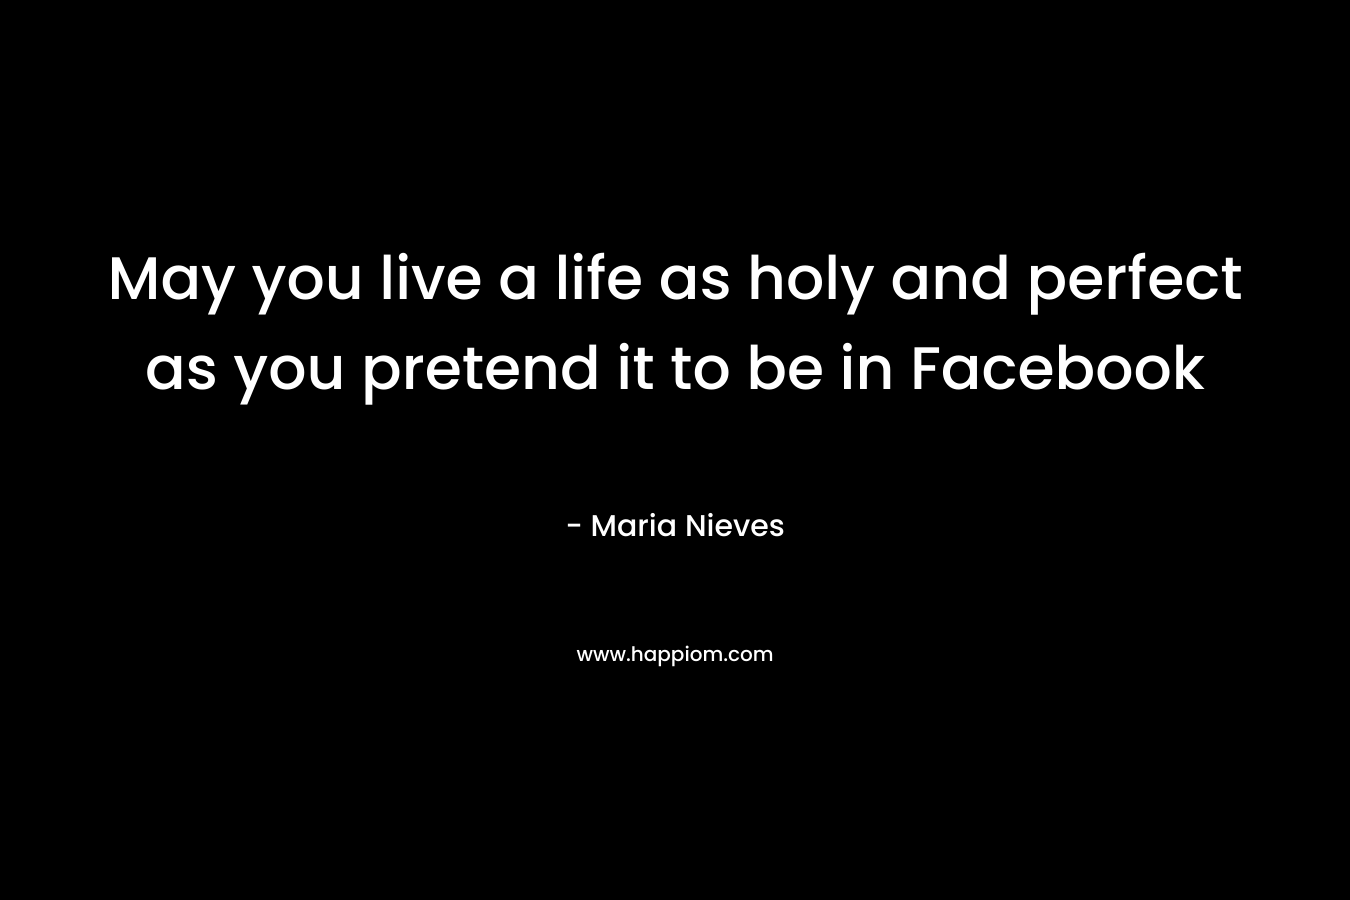 May you live a life as holy and perfect as you pretend it to be in Facebook